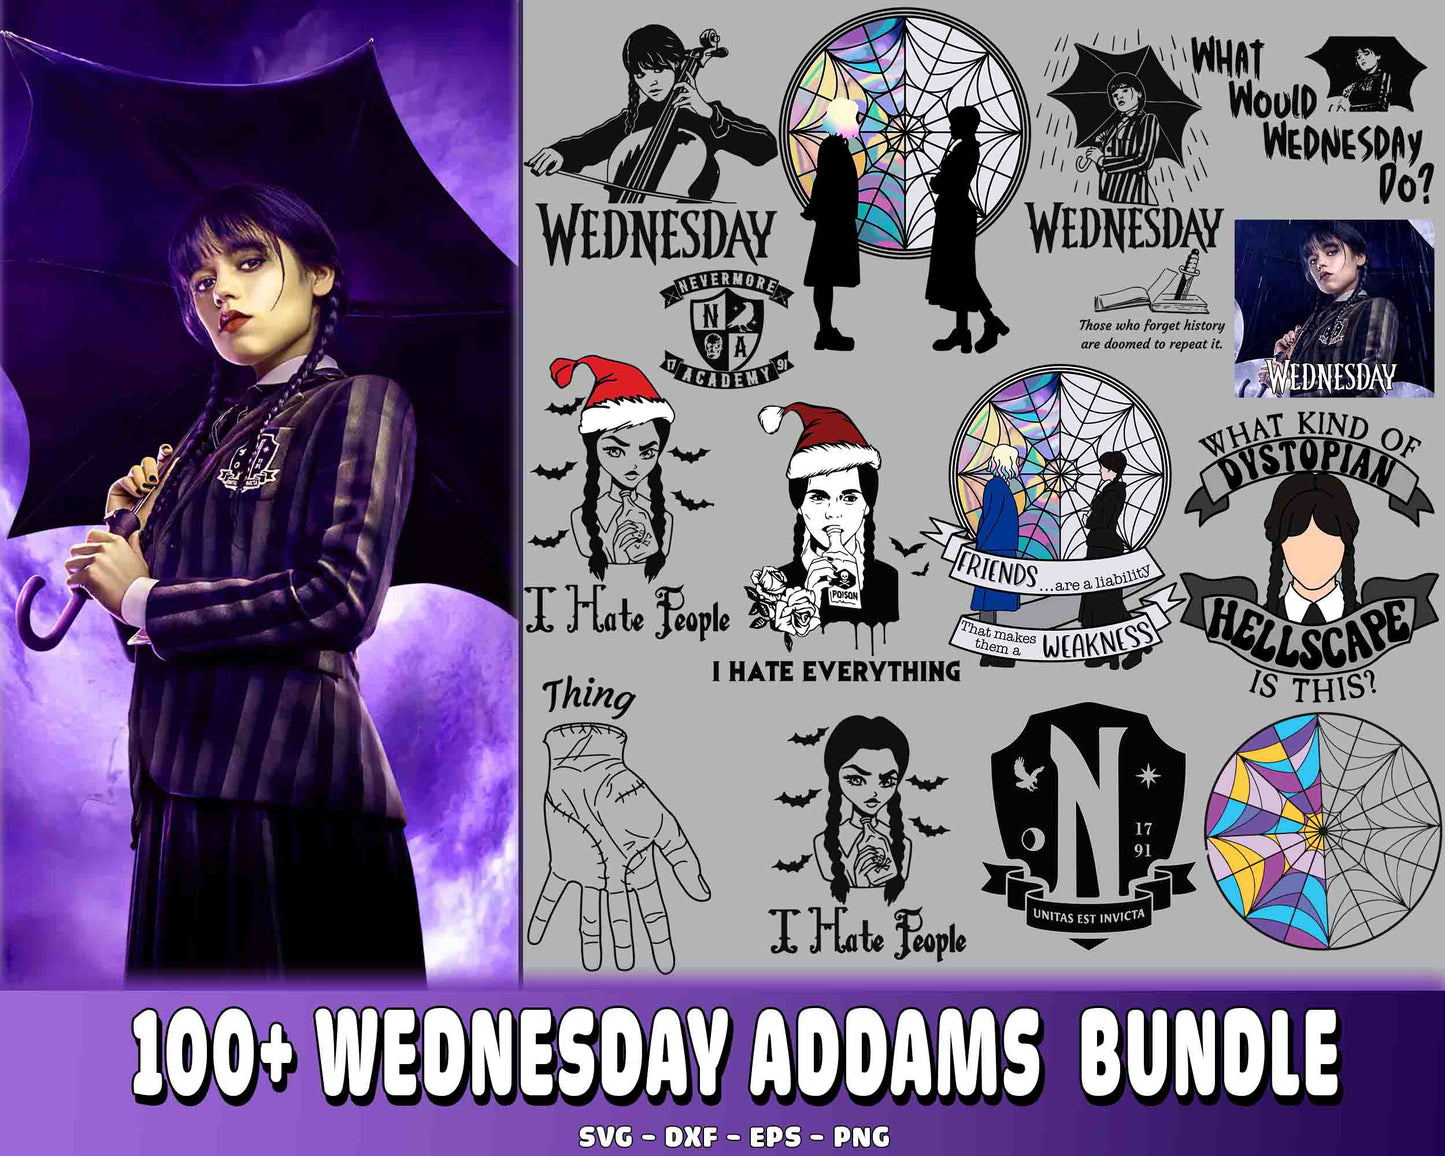 100+ Wednesday Addams bundle SVG , Wednesday Addams SVG DXF EPS PNG, for Cricut, Silhouette, digital, file cut